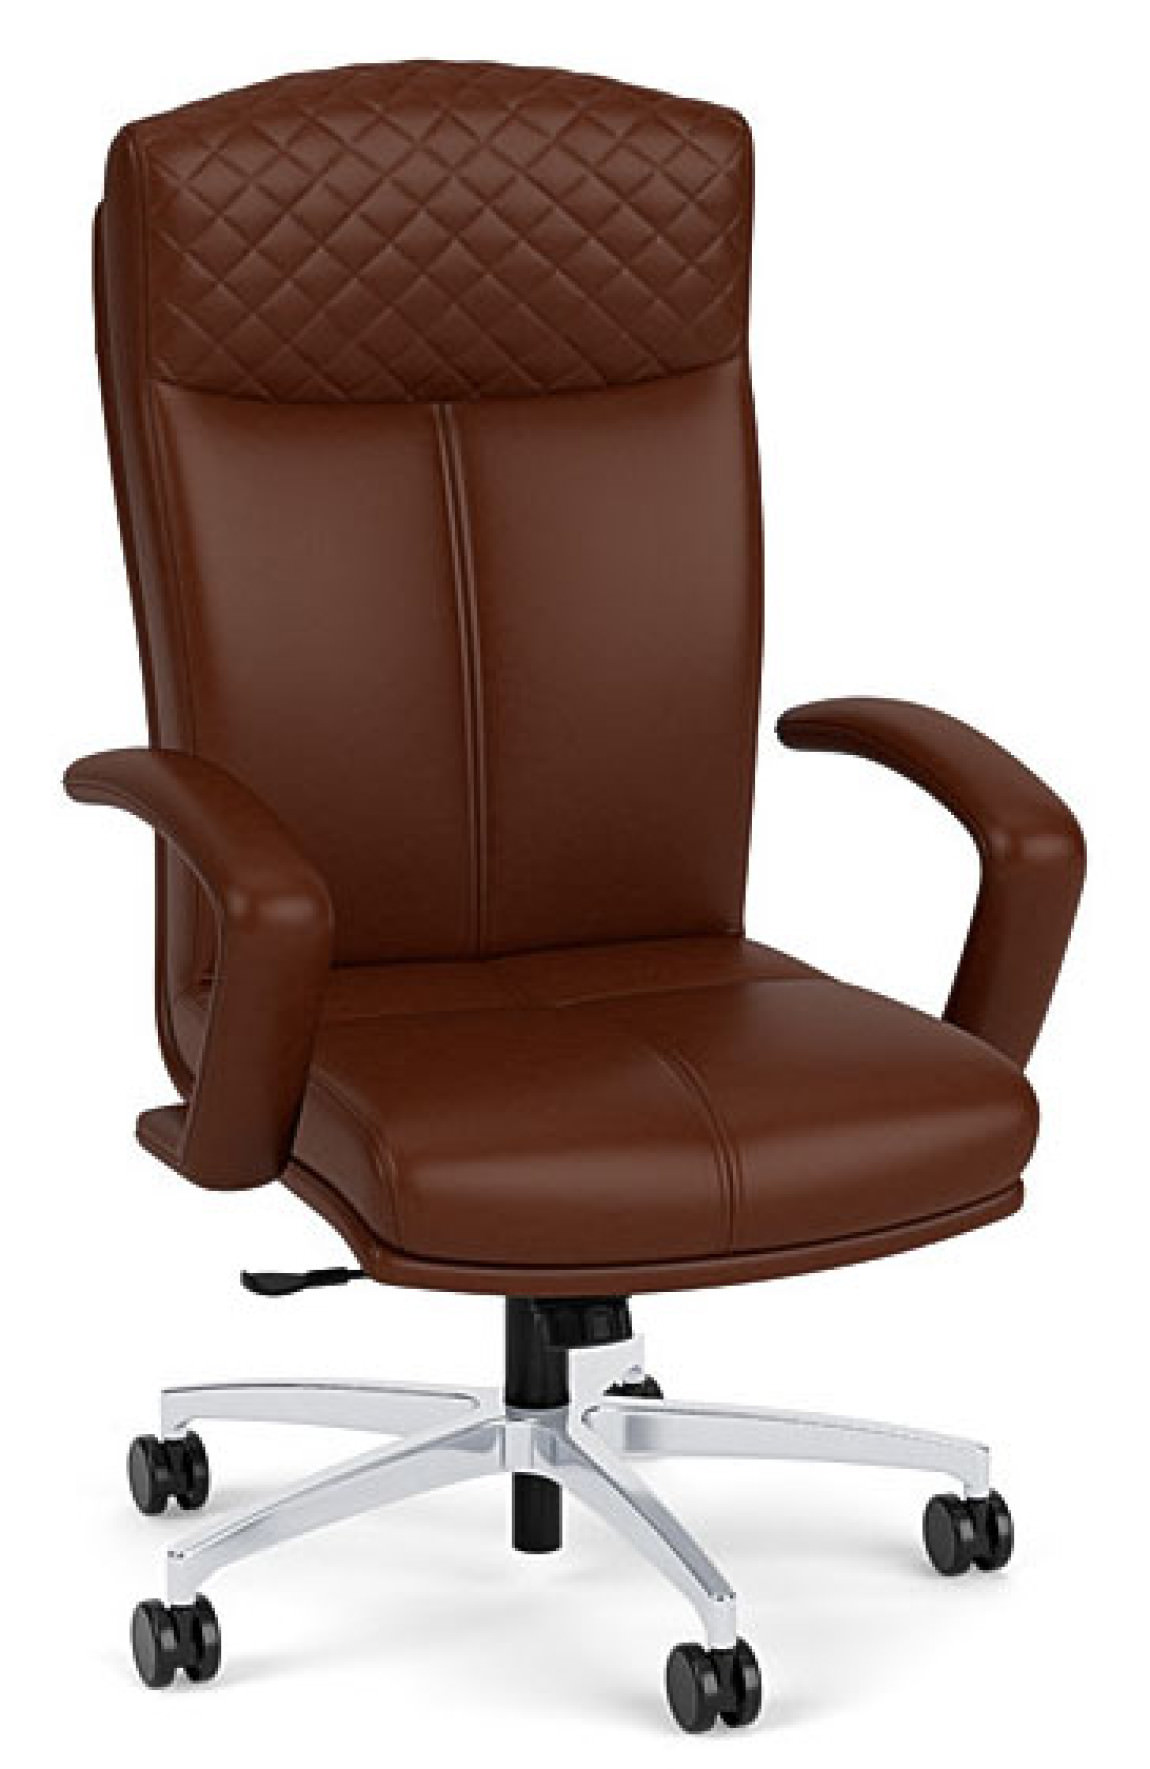 Leather Executive Conference Room Chair